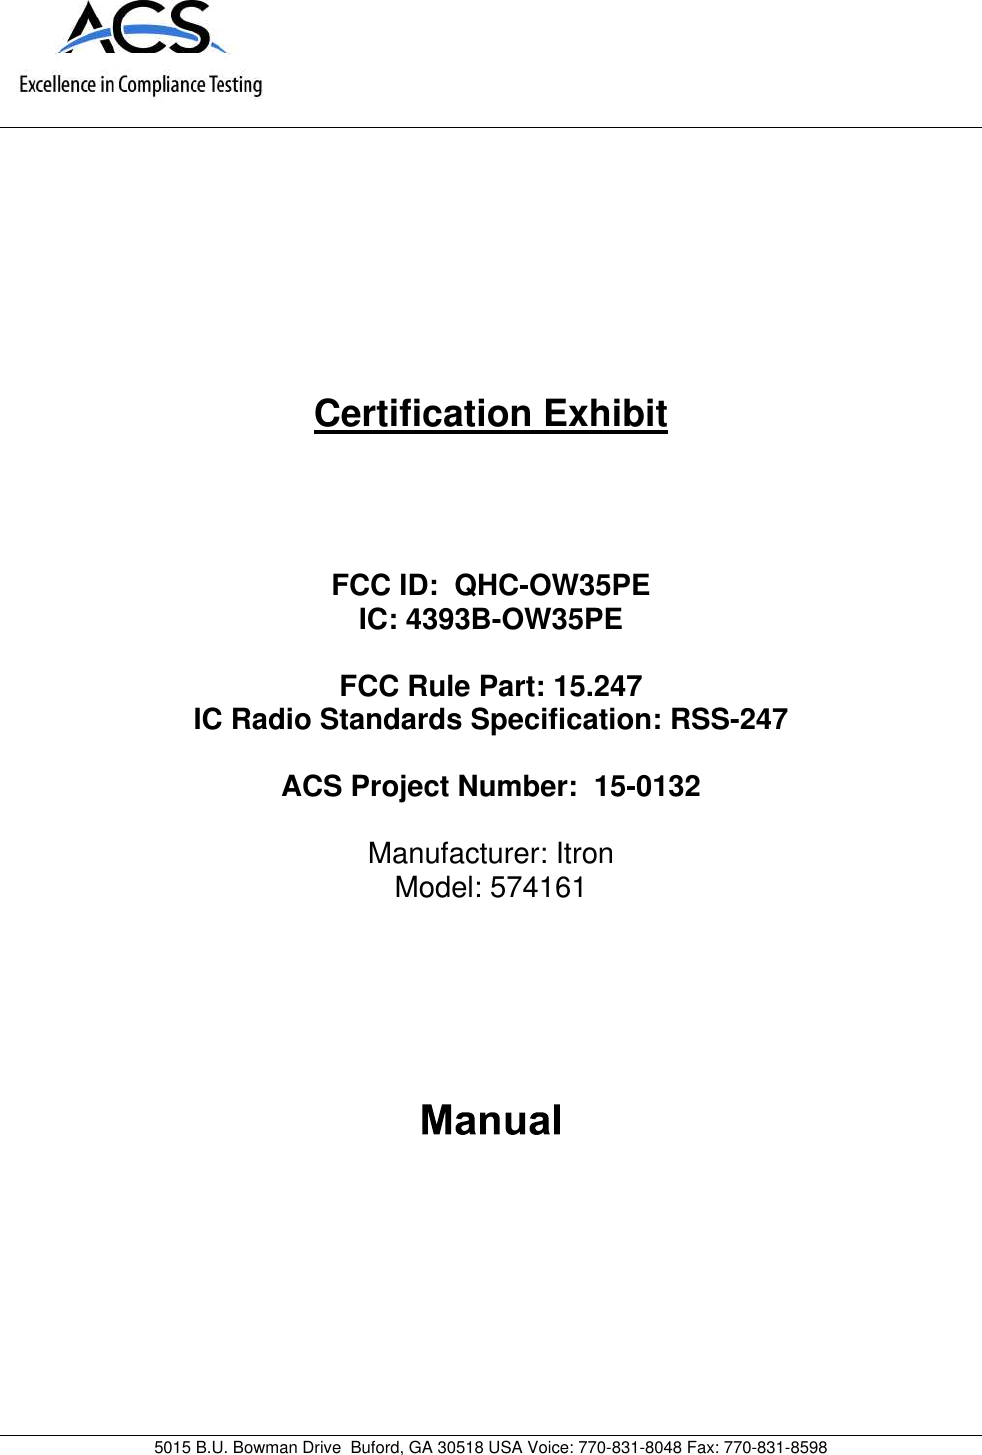 5015 B.U. Bowman Drive Buford, GA 30518 USA Voice: 770-831-8048 Fax: 770-831-8598Certification ExhibitFCC ID: QHC-OW35PEIC: 4393B-OW35PEFCC Rule Part: 15.247IC Radio Standards Specification: RSS-247ACS Project Number: 15-0132Manufacturer: ItronModel: 574161